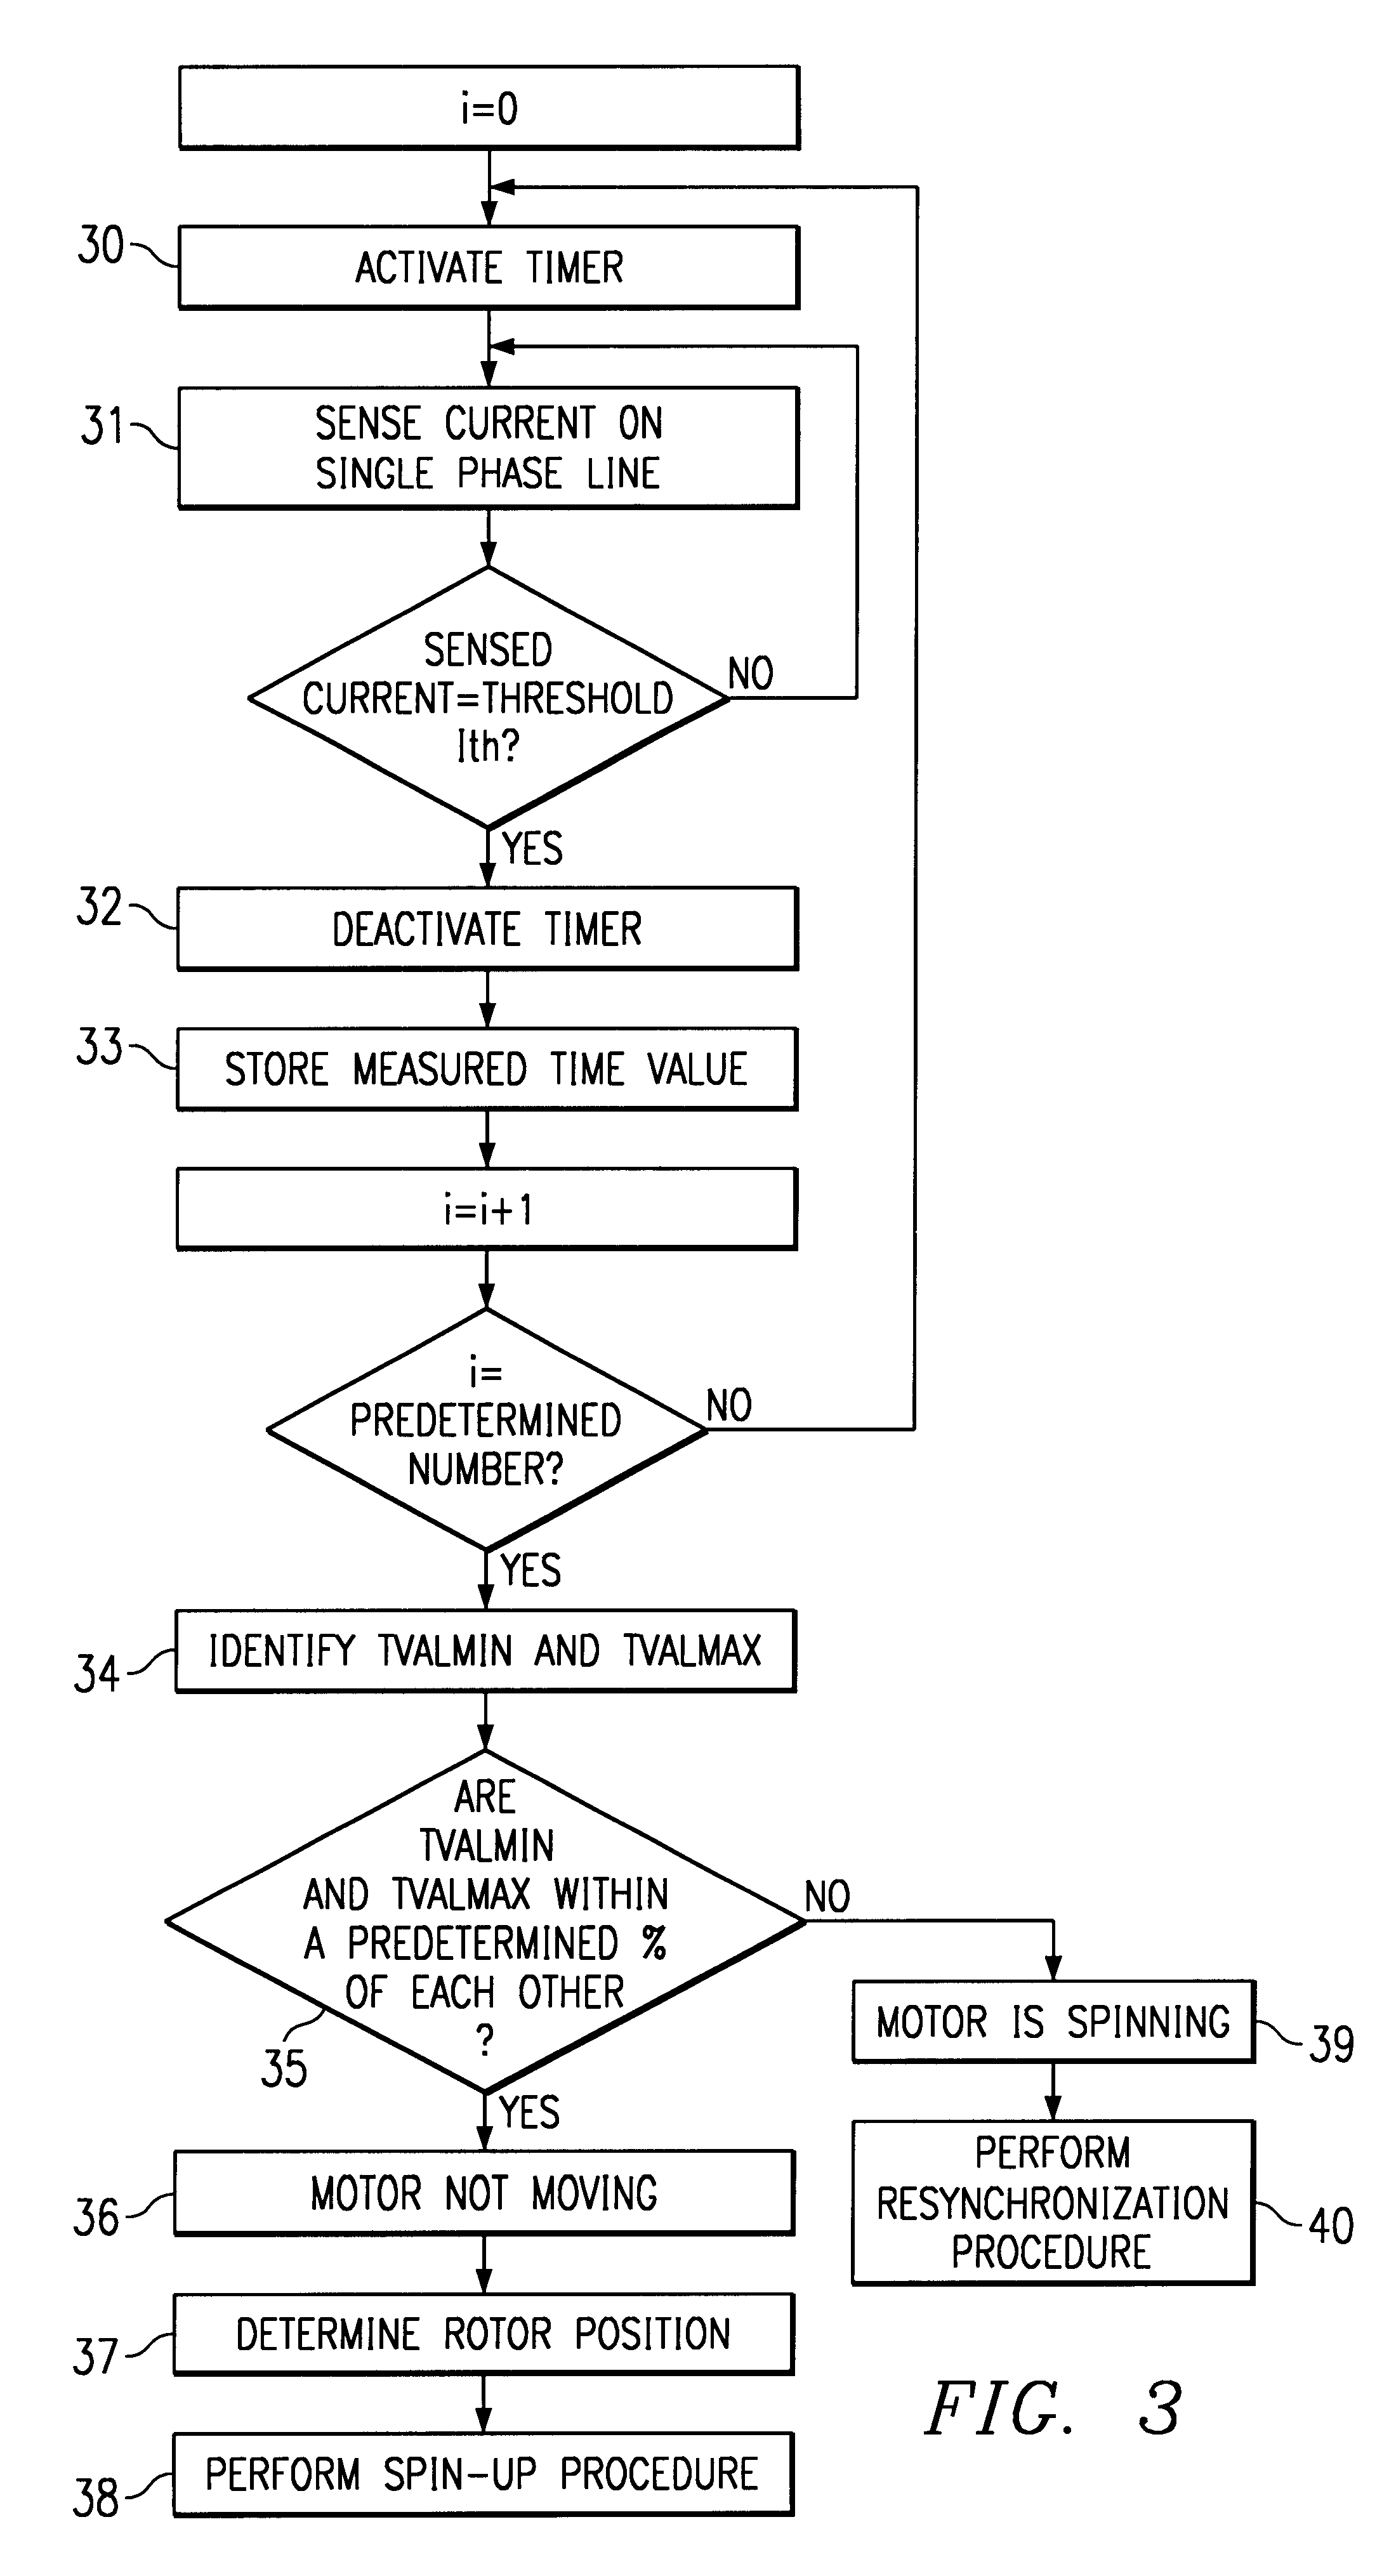 Method and apparatus for spinning a multiphase motor for a disk drive system from an inactive state